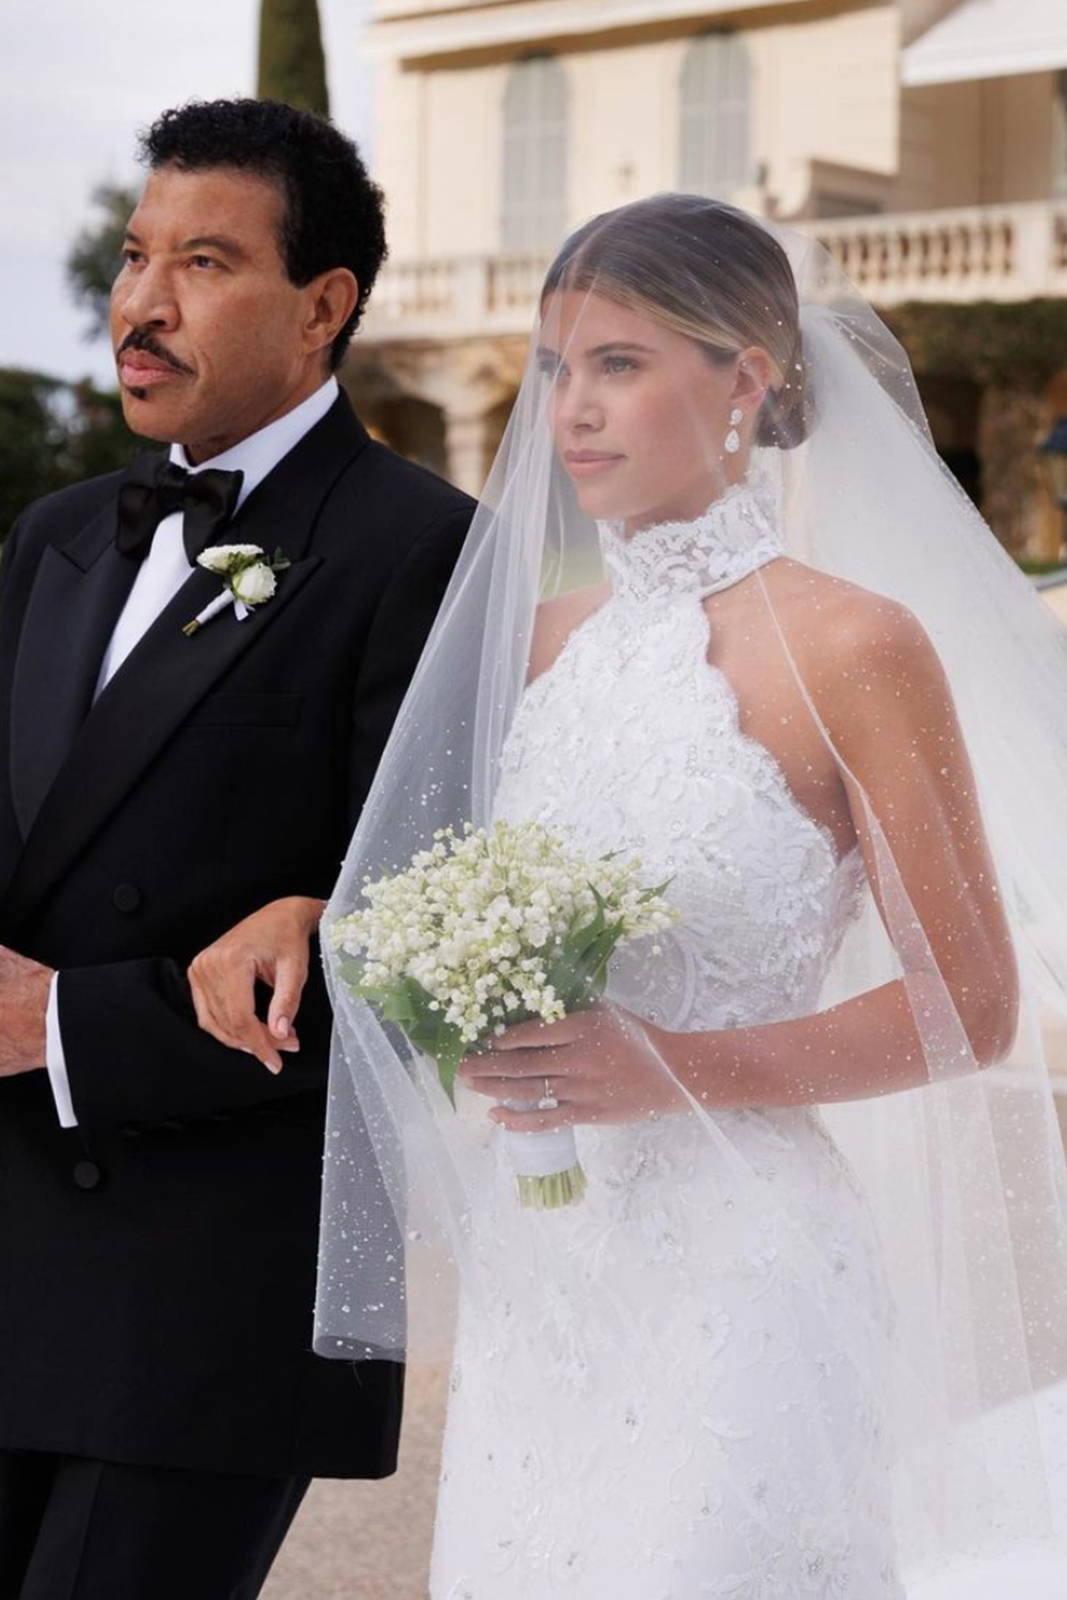 Sofia Richie with her father walking down the aisle